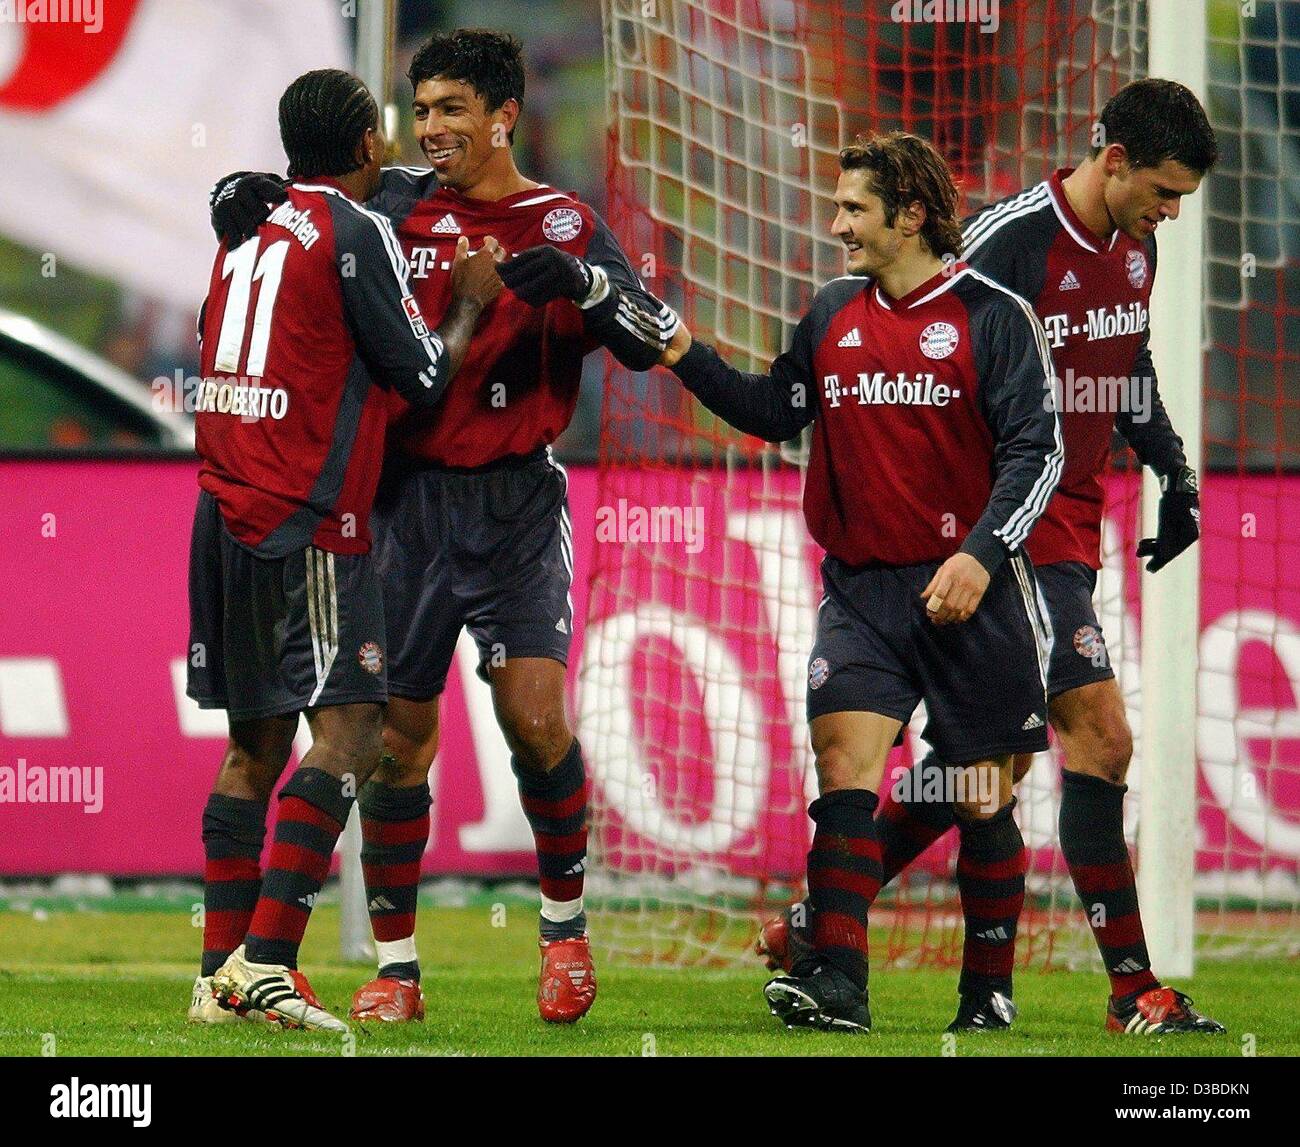 (dpa) - Bayern's Brazilian striker Giovane Elber (2nd from L) cheers with his teammates Ze Roberto (L), Bixente Lizarazu (2nd from R) and Michael Ballack (R) after he scored the goal to the 3-0 lead during the Bundesliga soccer game Bayern Munich against Moenchengladbach in Munich, 26 January 2003.  Stock Photo